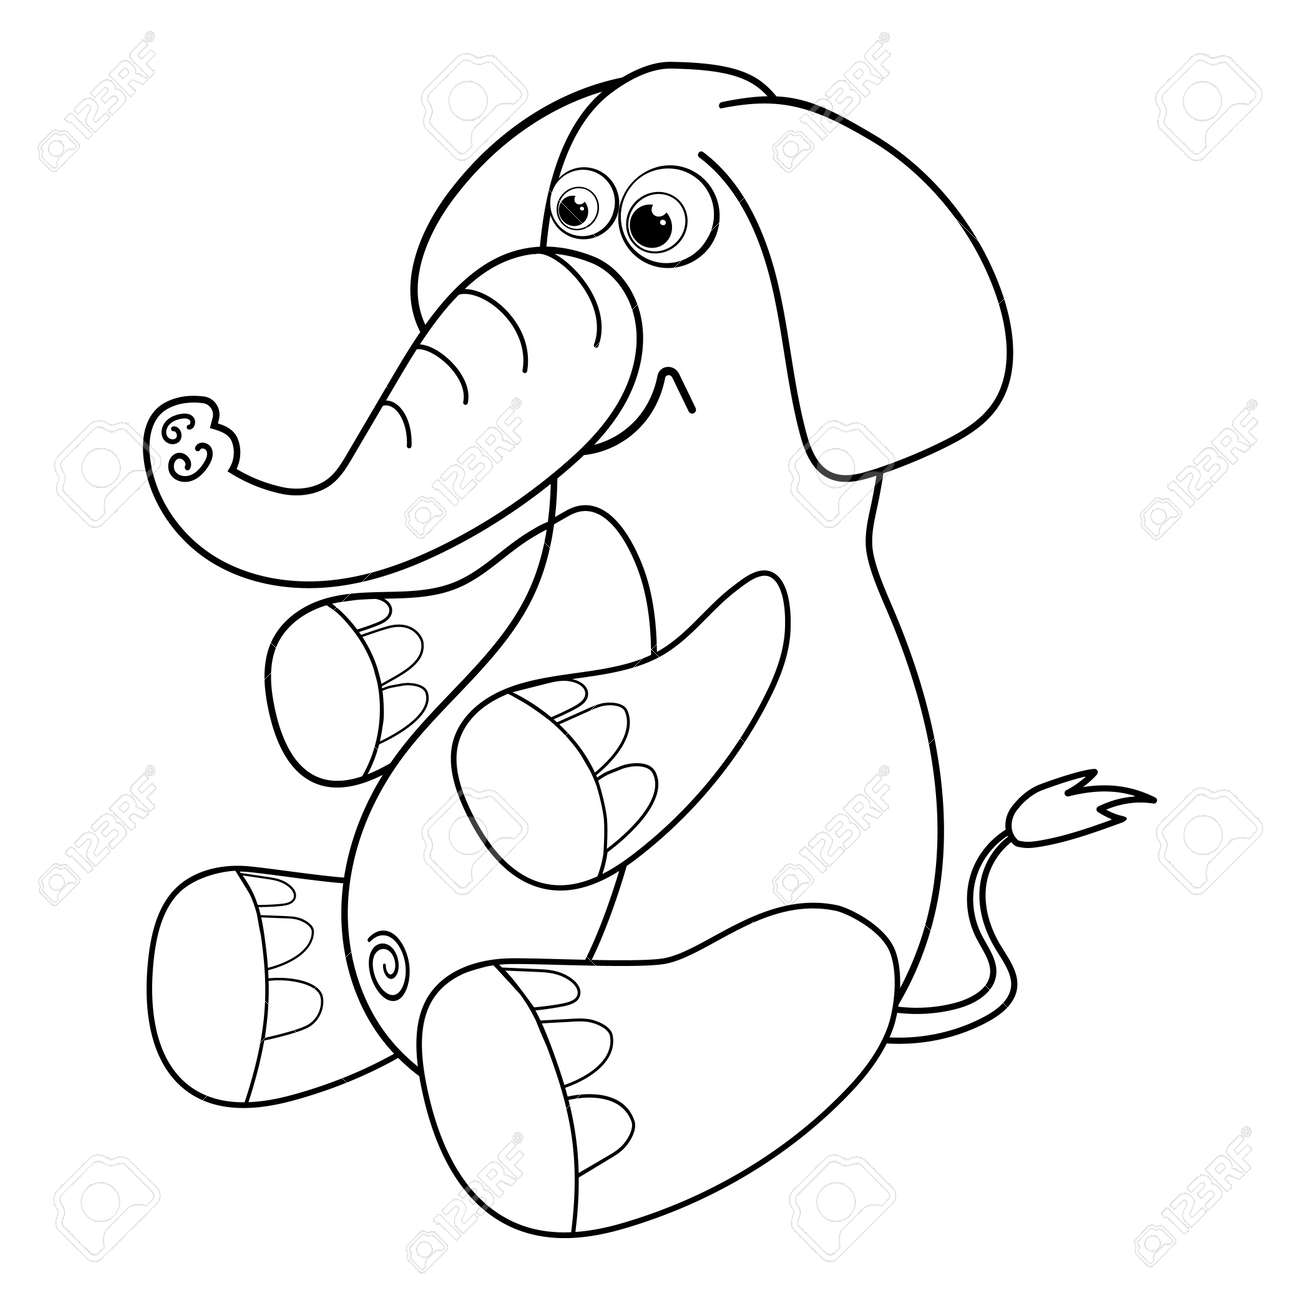 Colorless cartoon elephant sitting coloring pages template page for coloring book of funny elephant for kids practice worksheet or anti